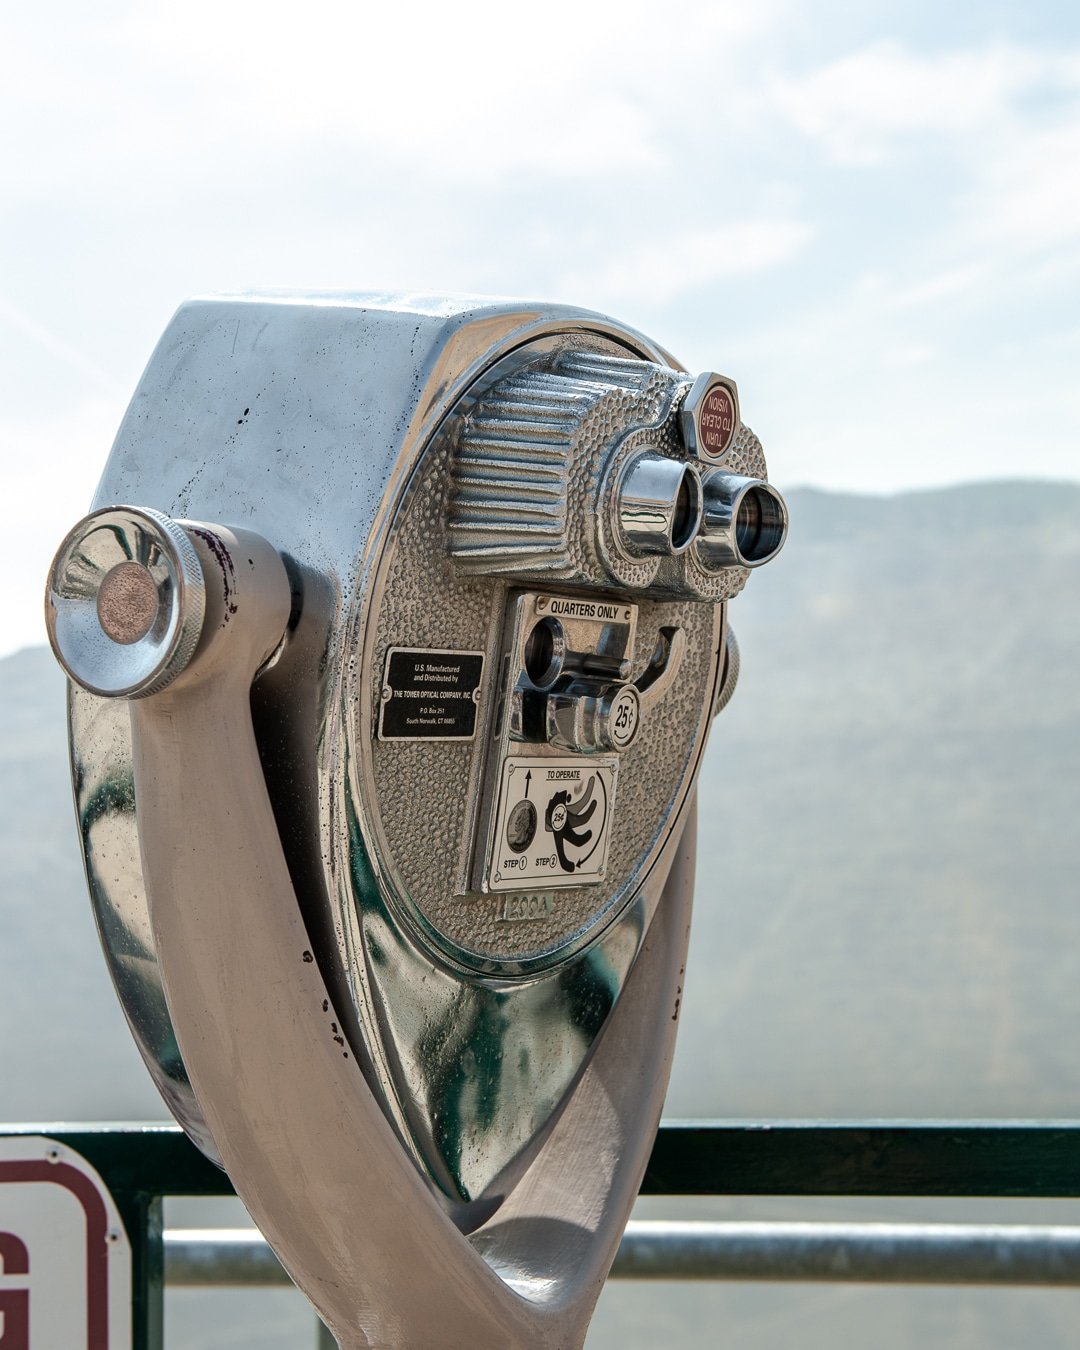 A tower viewer used by tourists to get a better view of the hazy mountains in the distance.